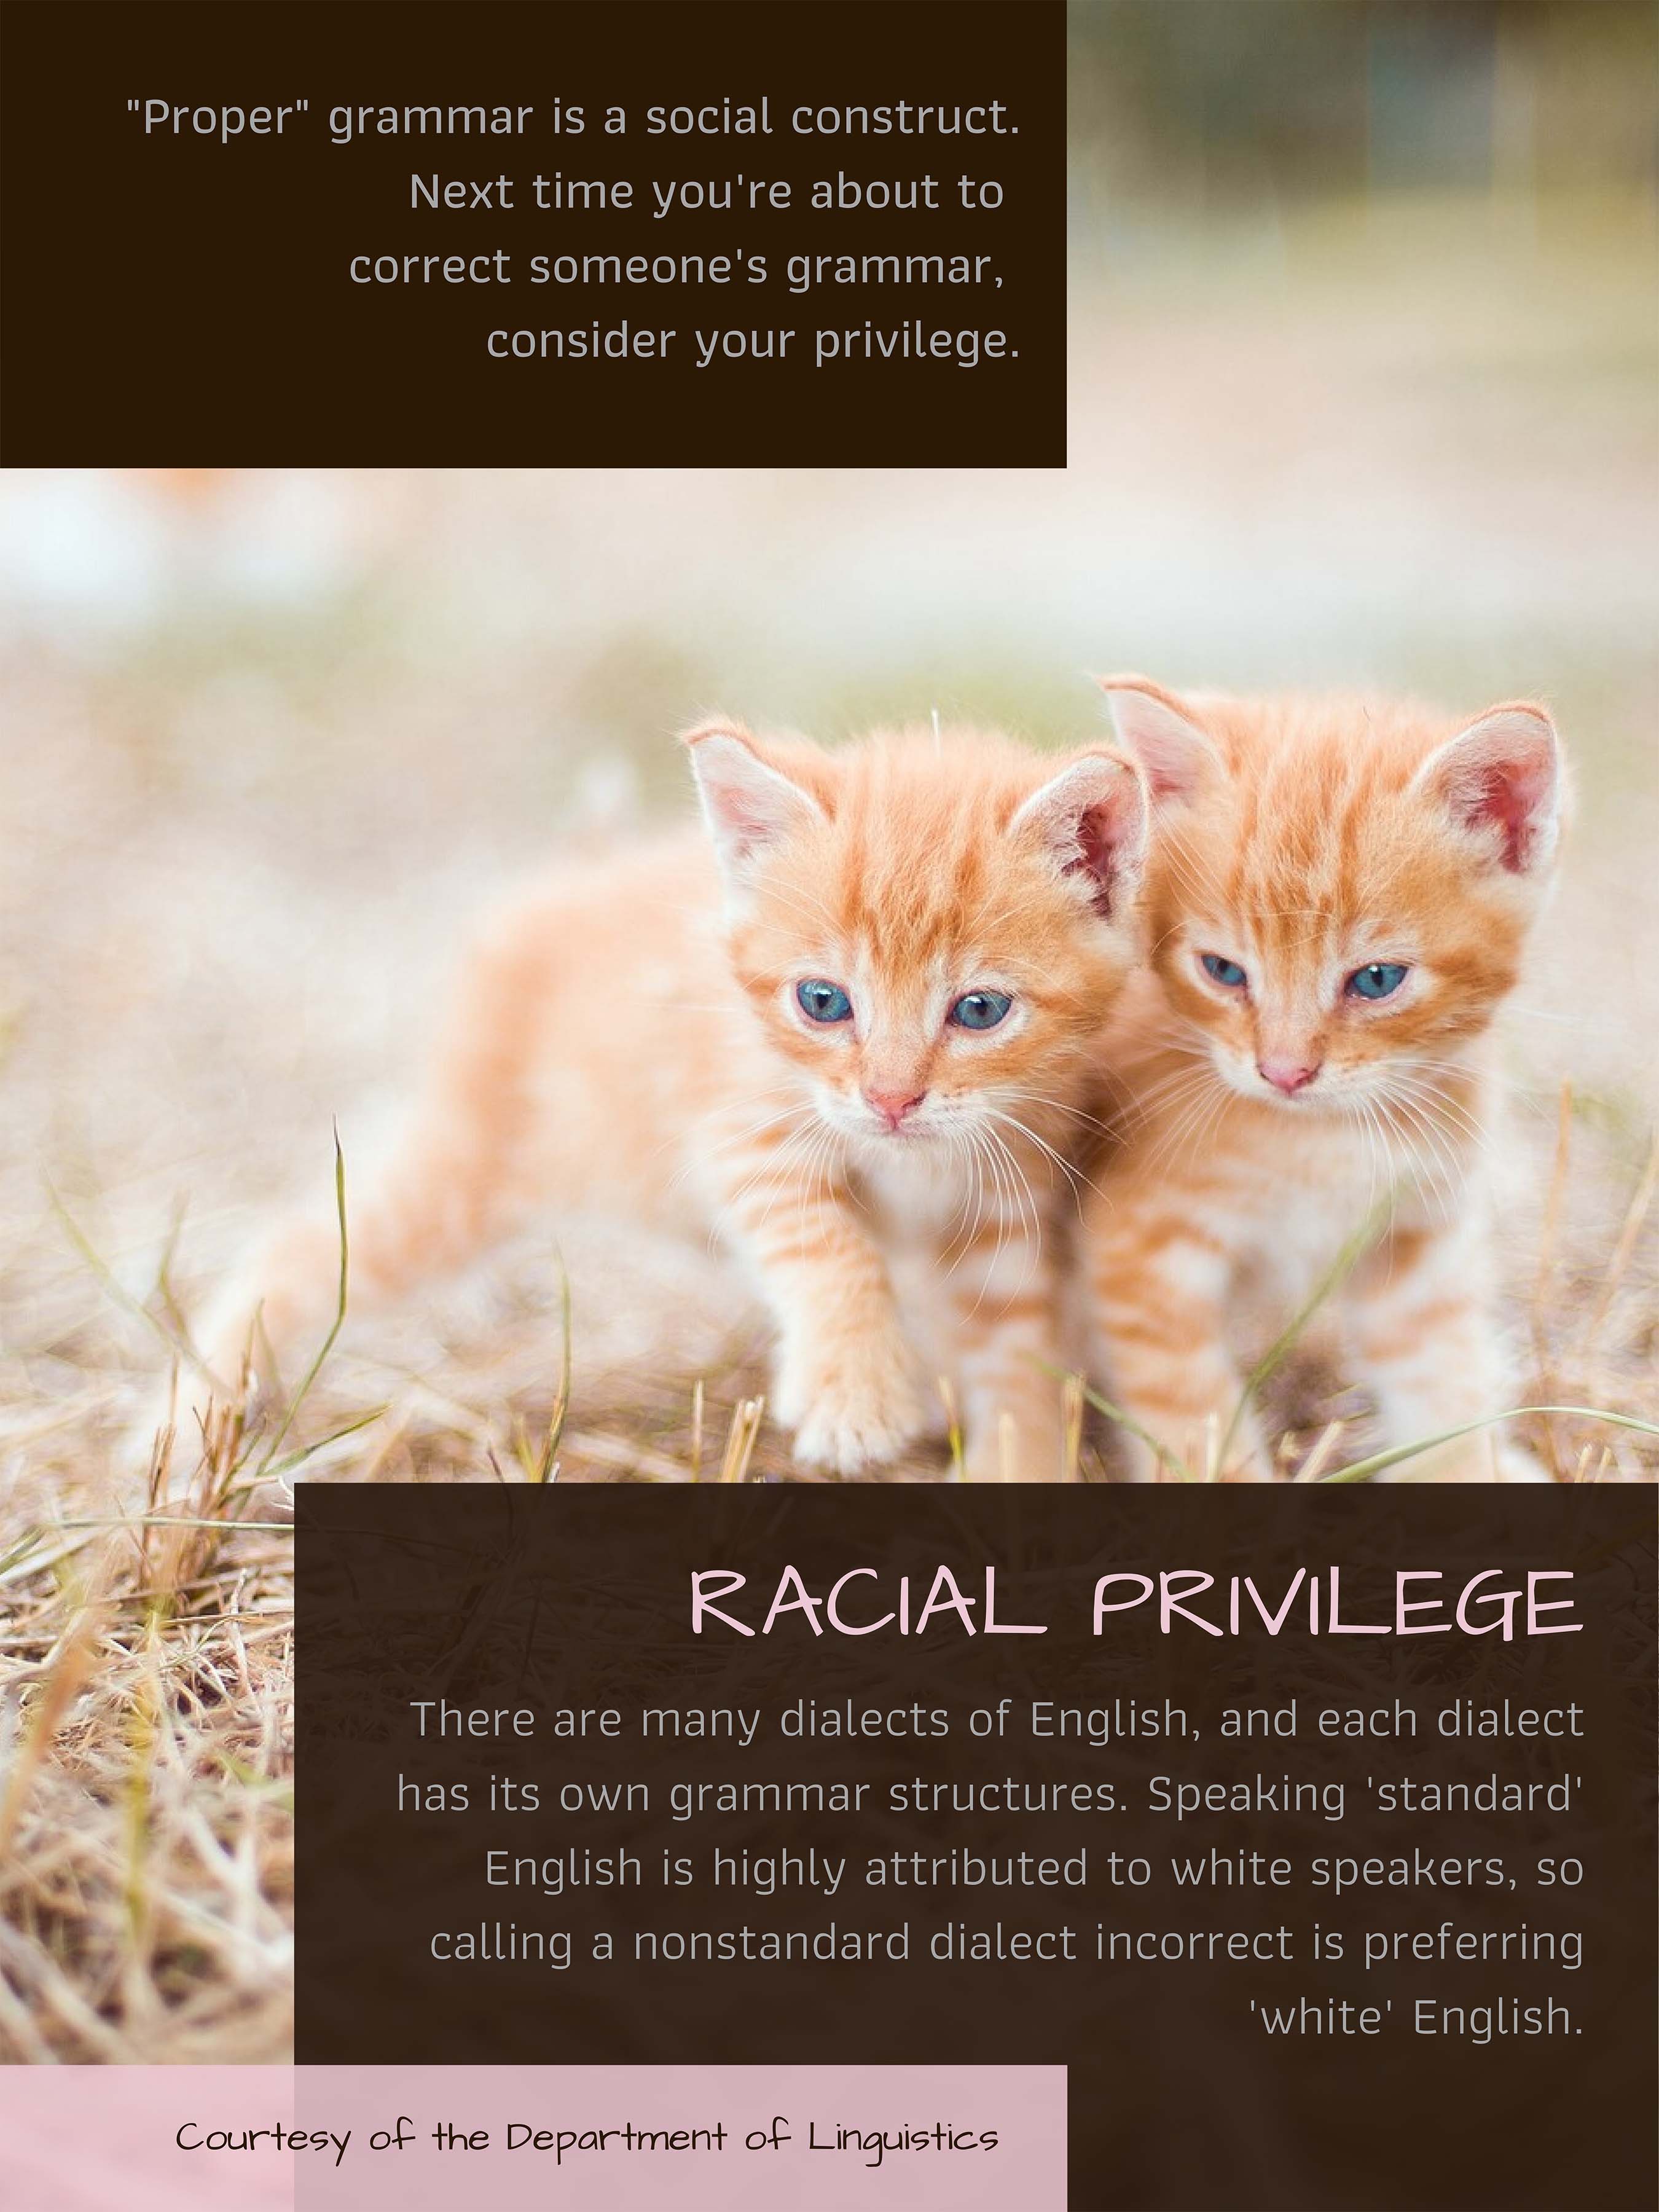 "Proper Grammar" is a social construct. Consider your racial privilege. Click on image for full description.